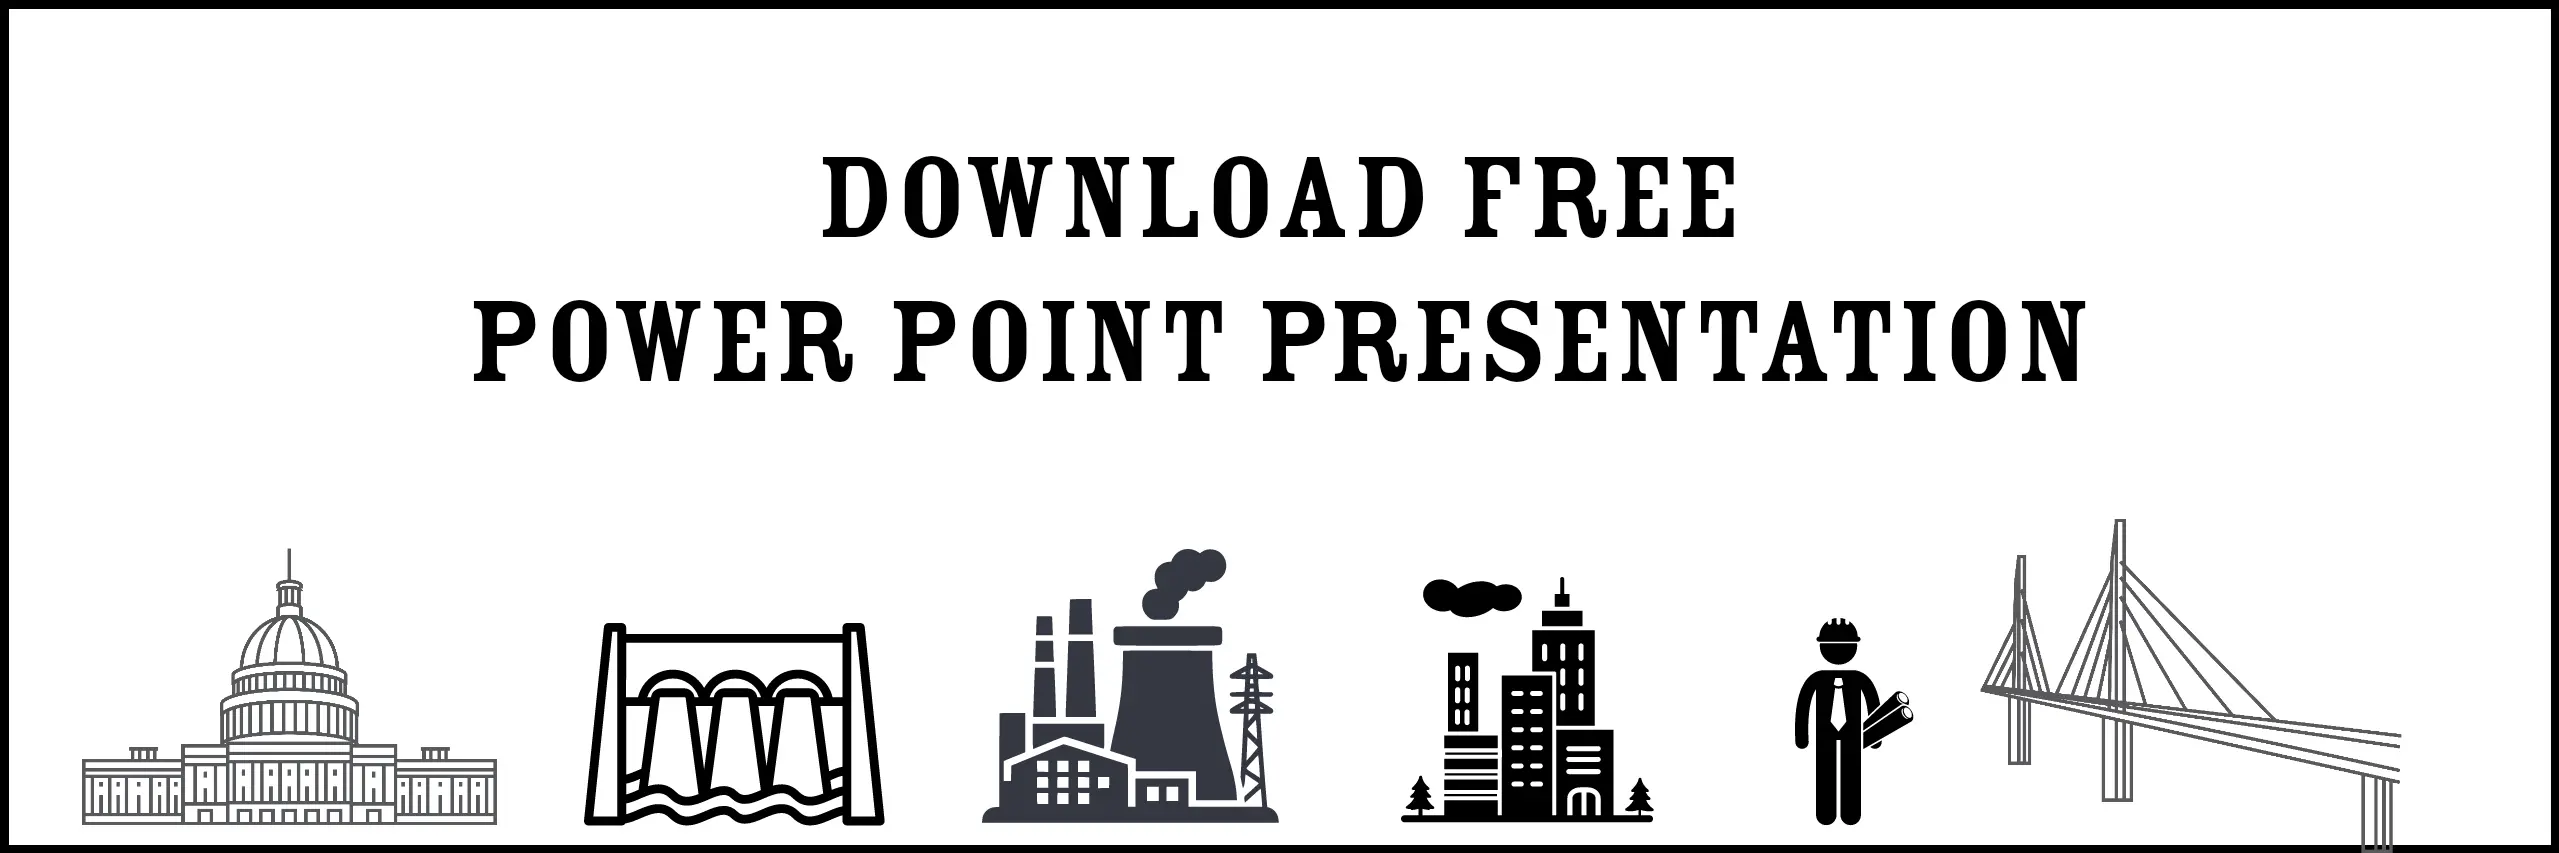 Download Free PPT'S related to Civil Engineering